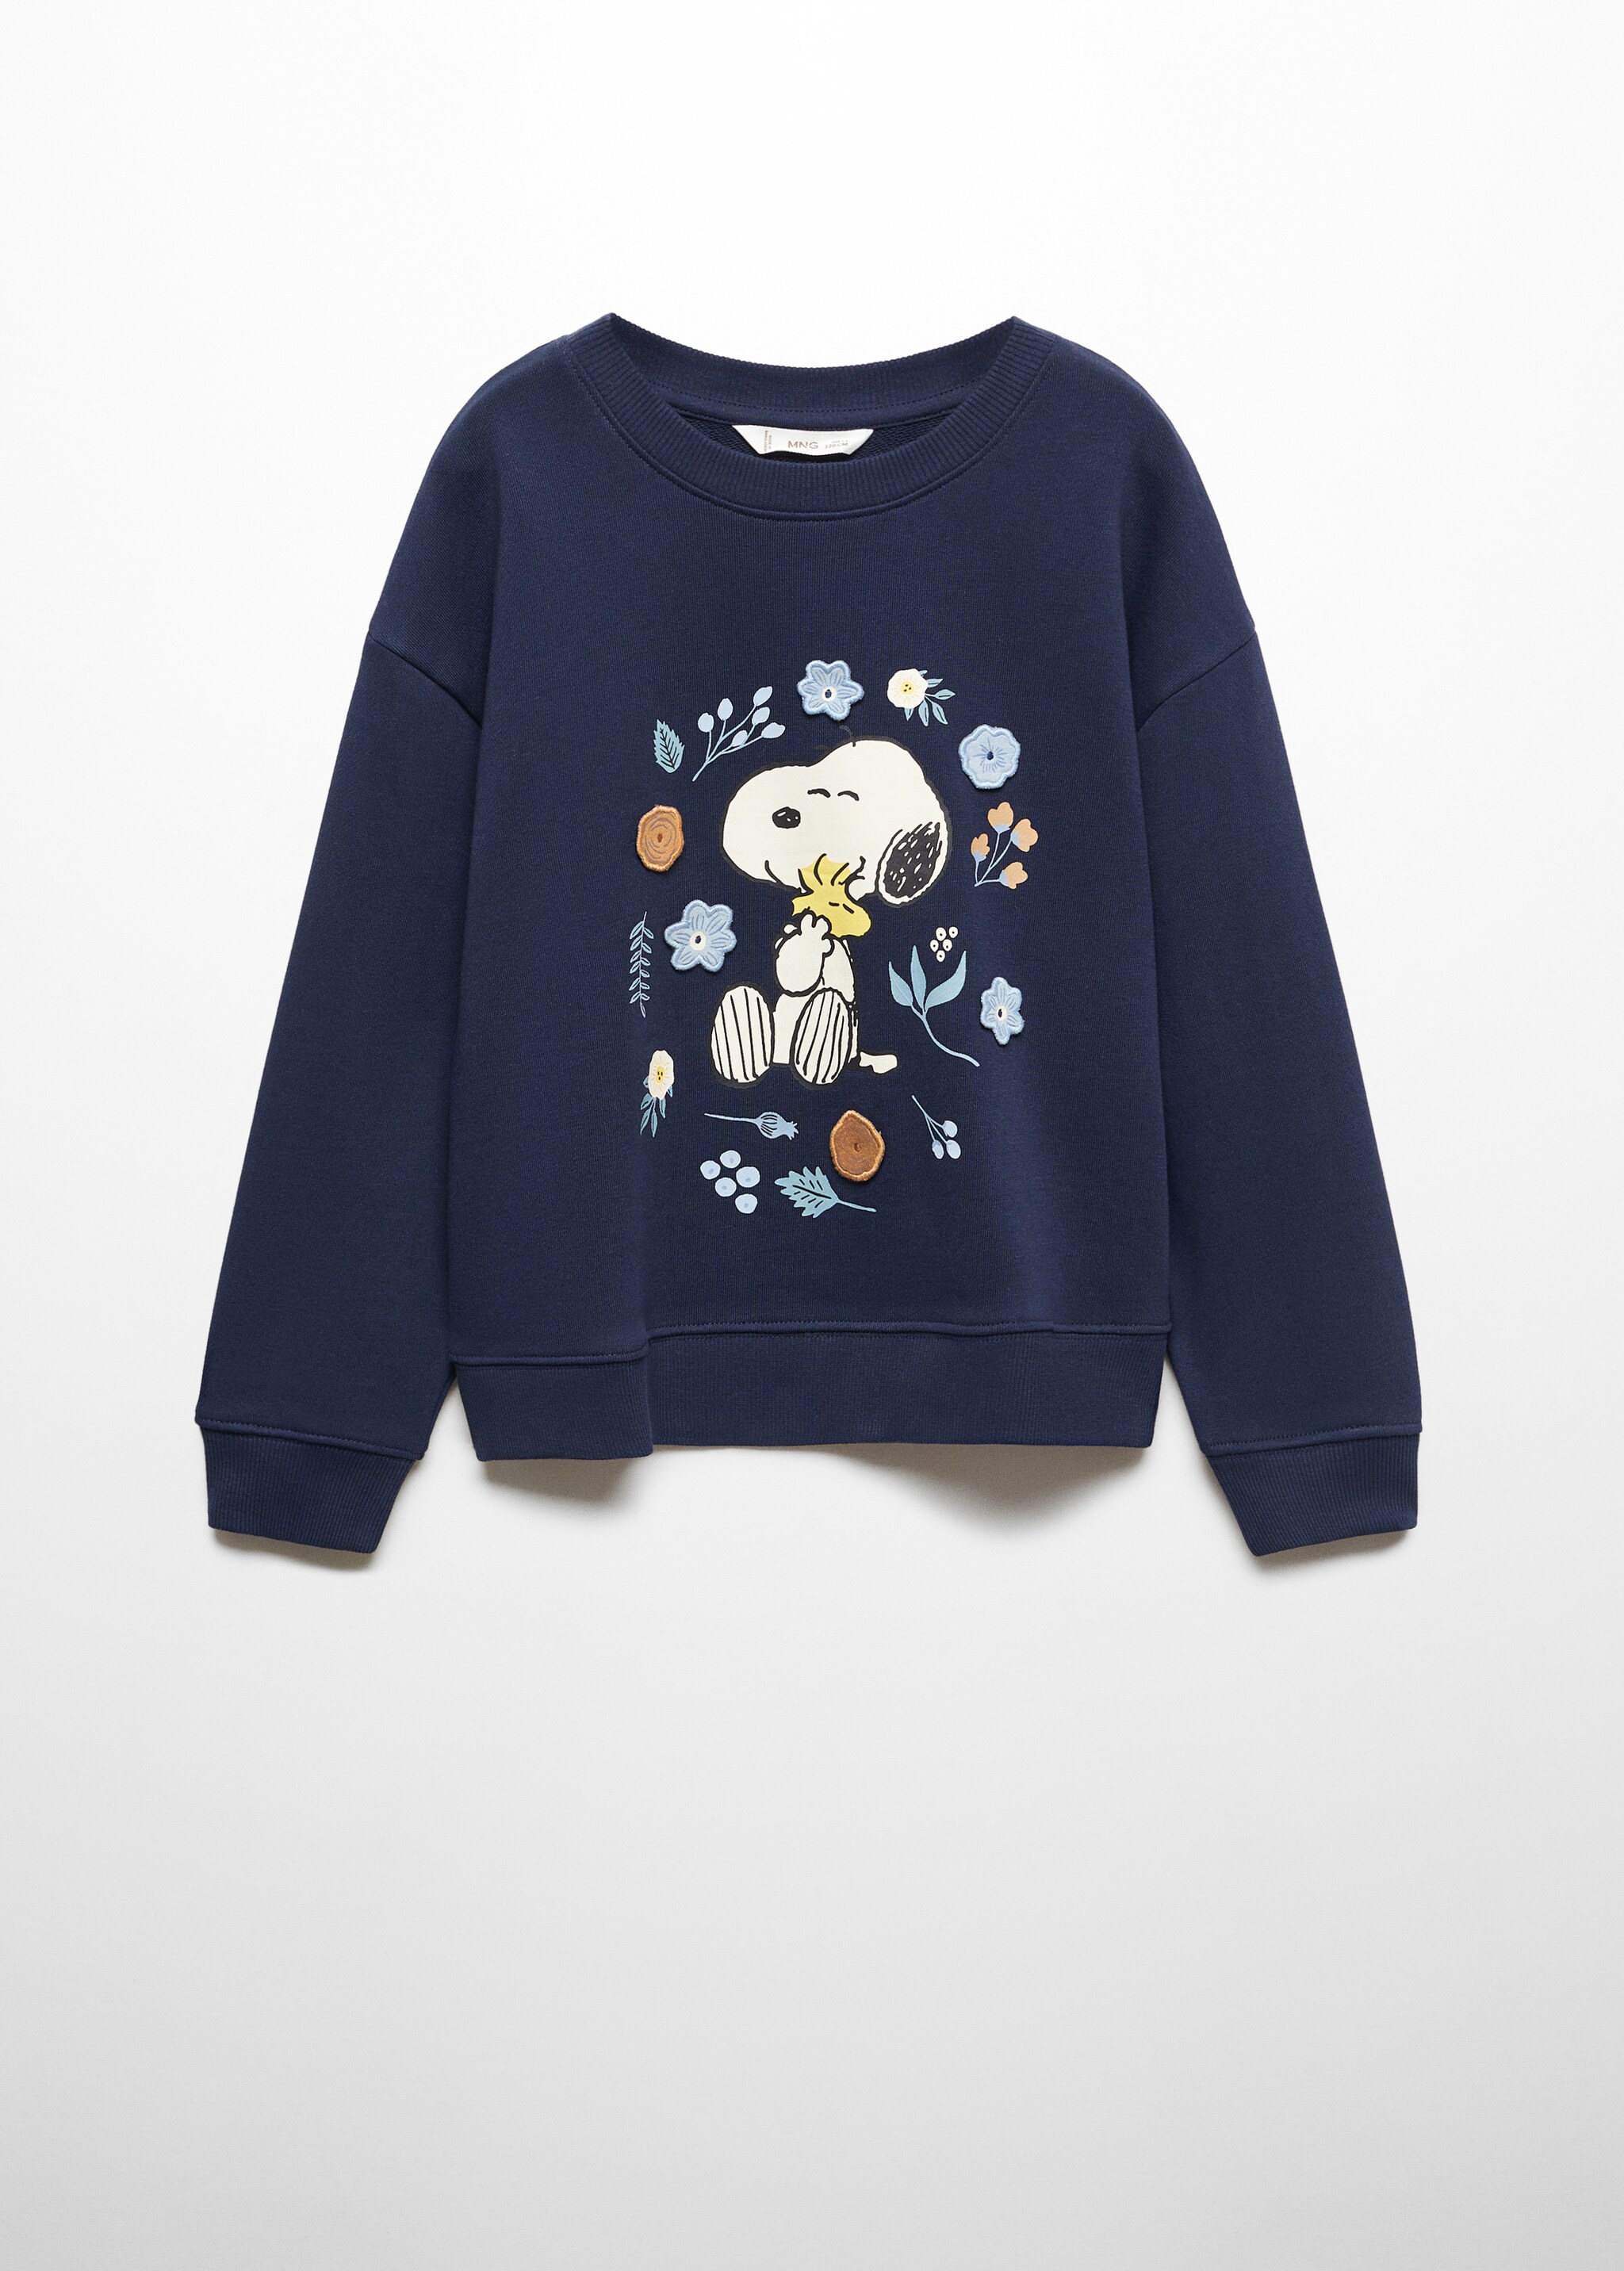 Snoopy-print sweatshirt - Article without model